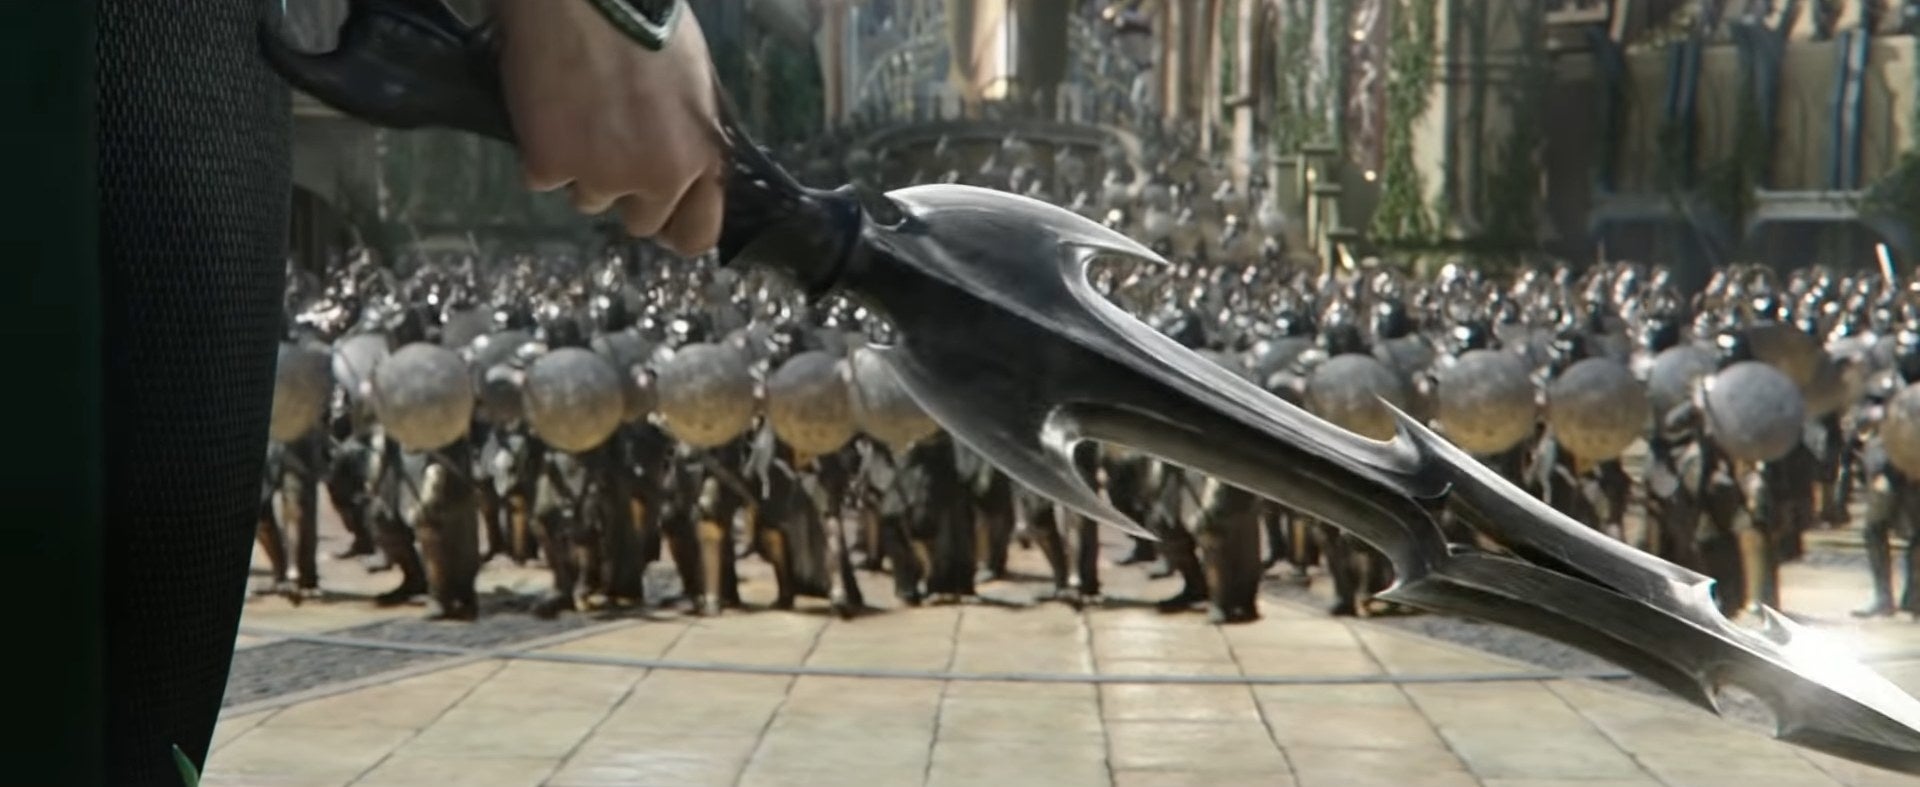 Hela holding a necrosword in front of the Asgardian army in "Thor: Ragnarok"